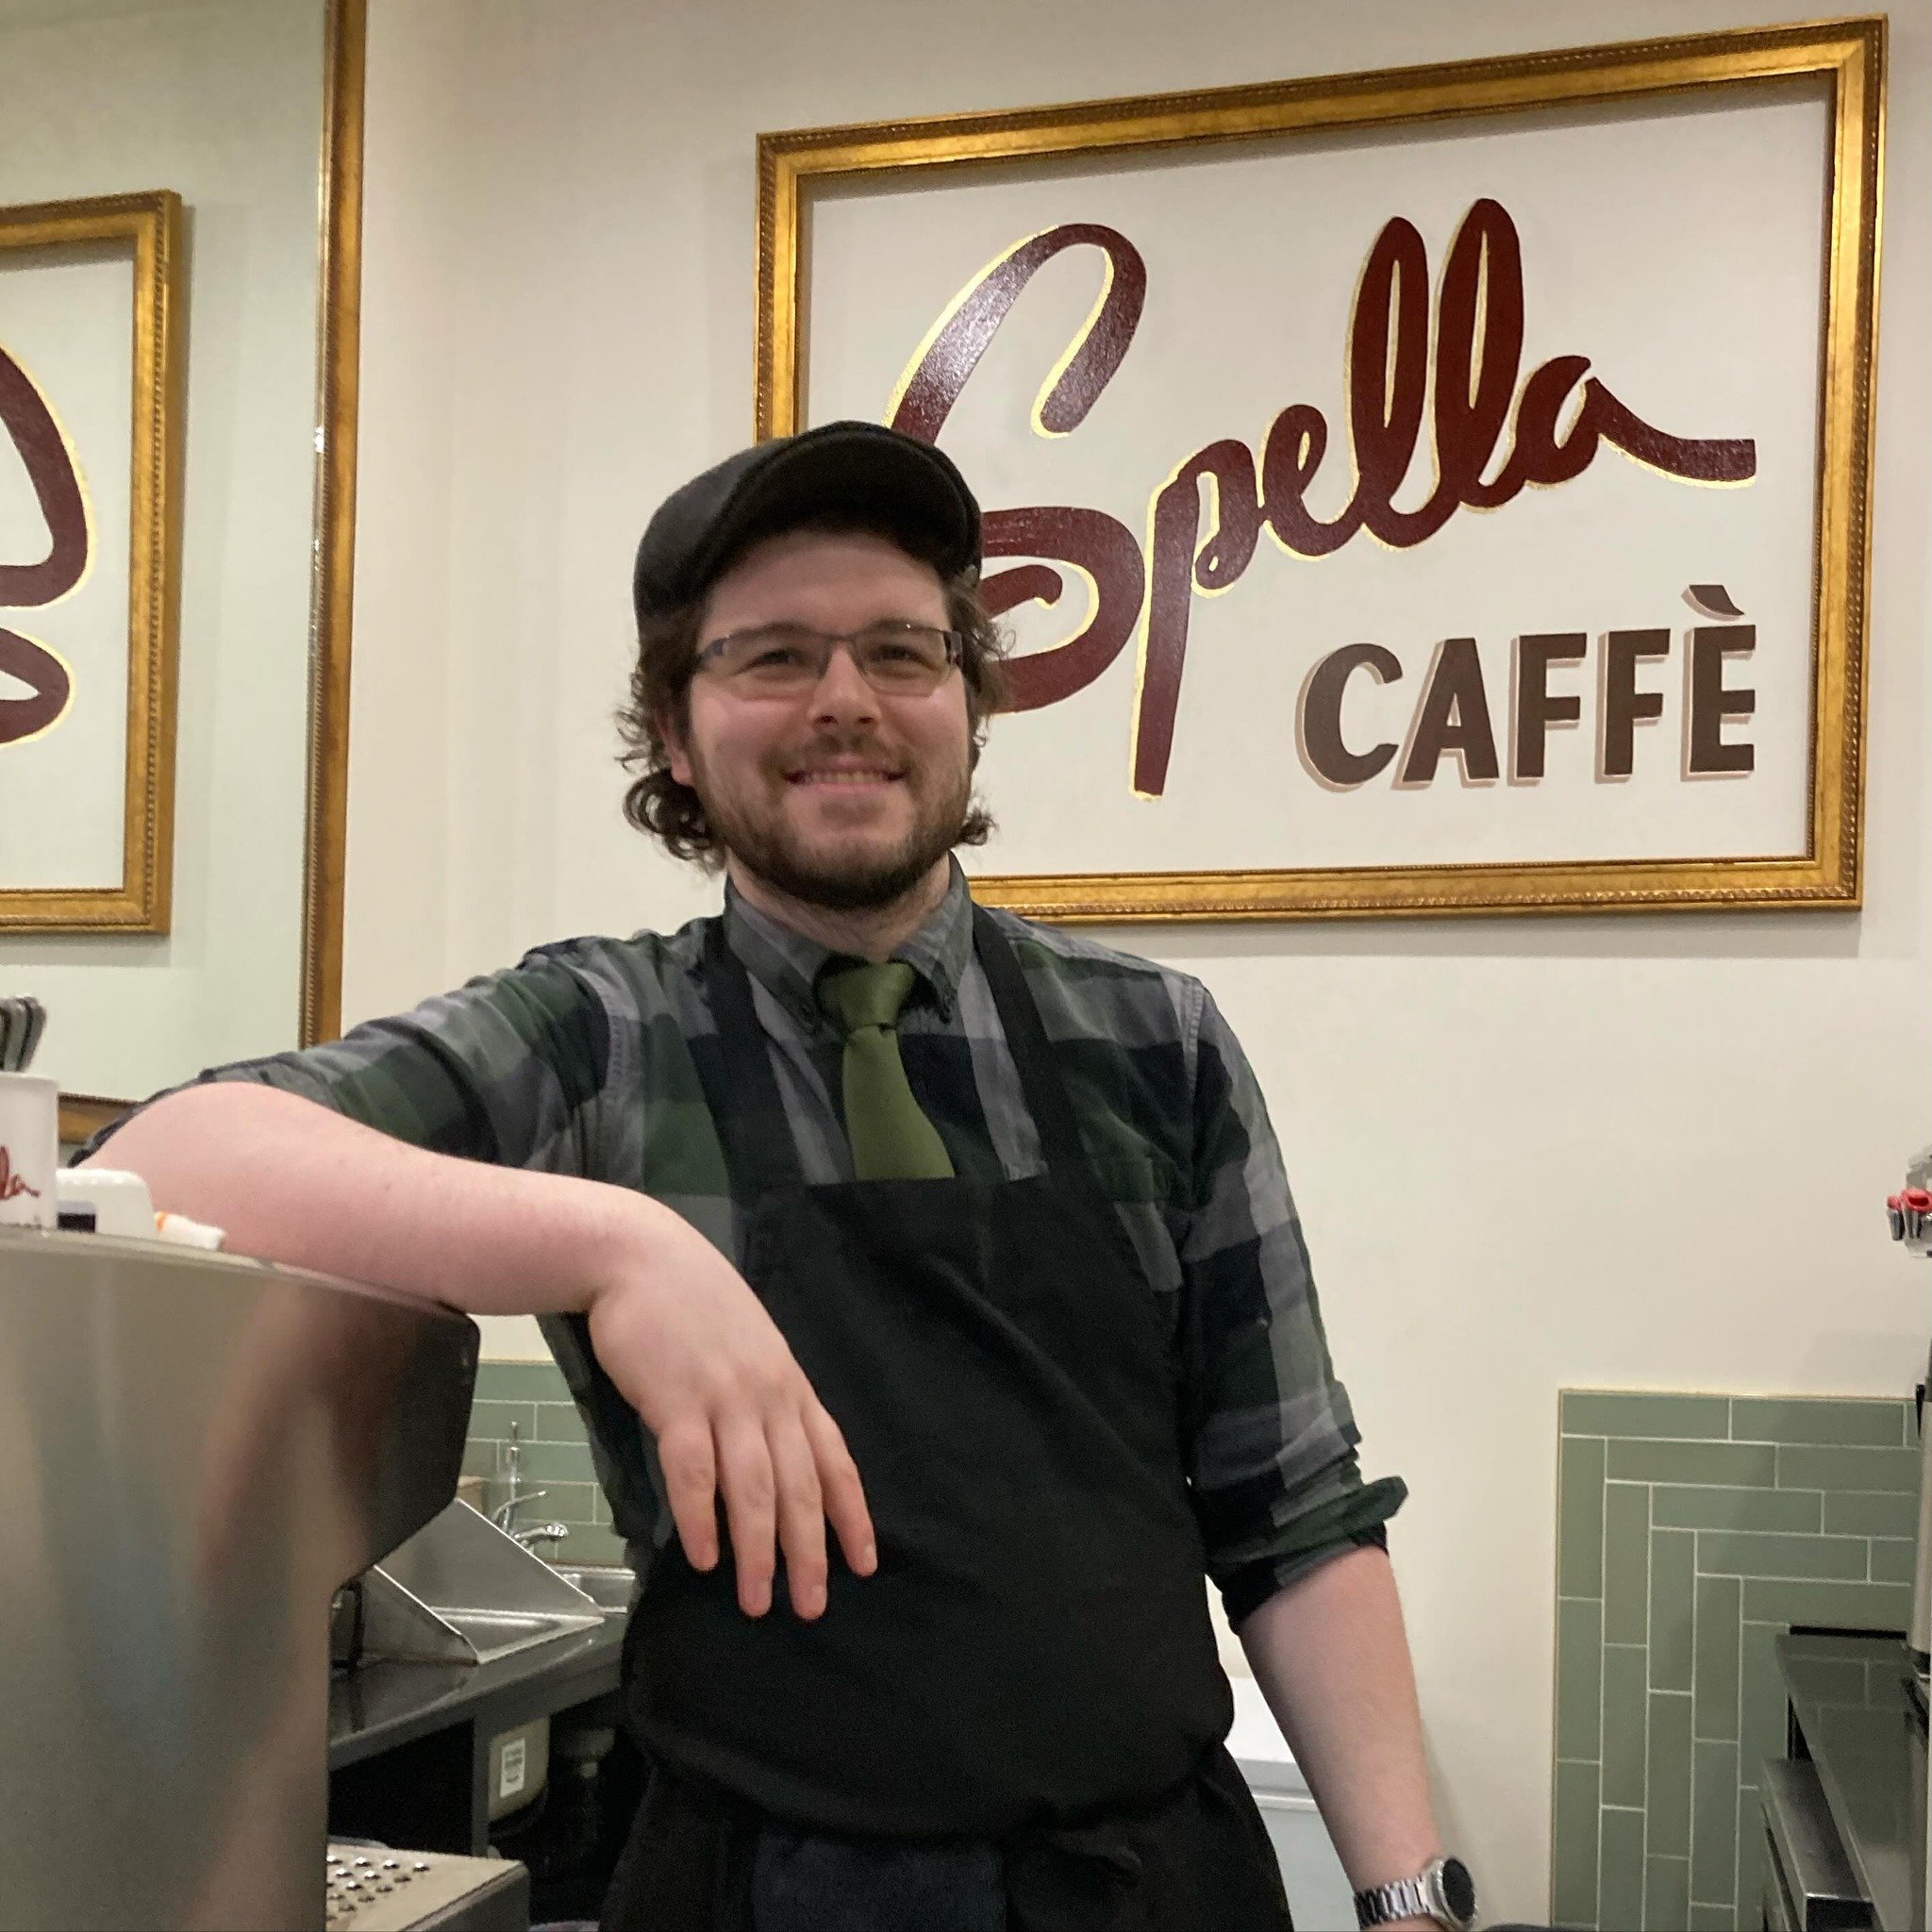 Happy birthday to Austin- 5/2 🎈🎉 Austin is Spella&rsquo;s Alder Street caff&egrave; manager and main barista! He is currently enjoying a staycation so send him all your warm wishes when you see him. This fine chap has a heart bigger than his body. 